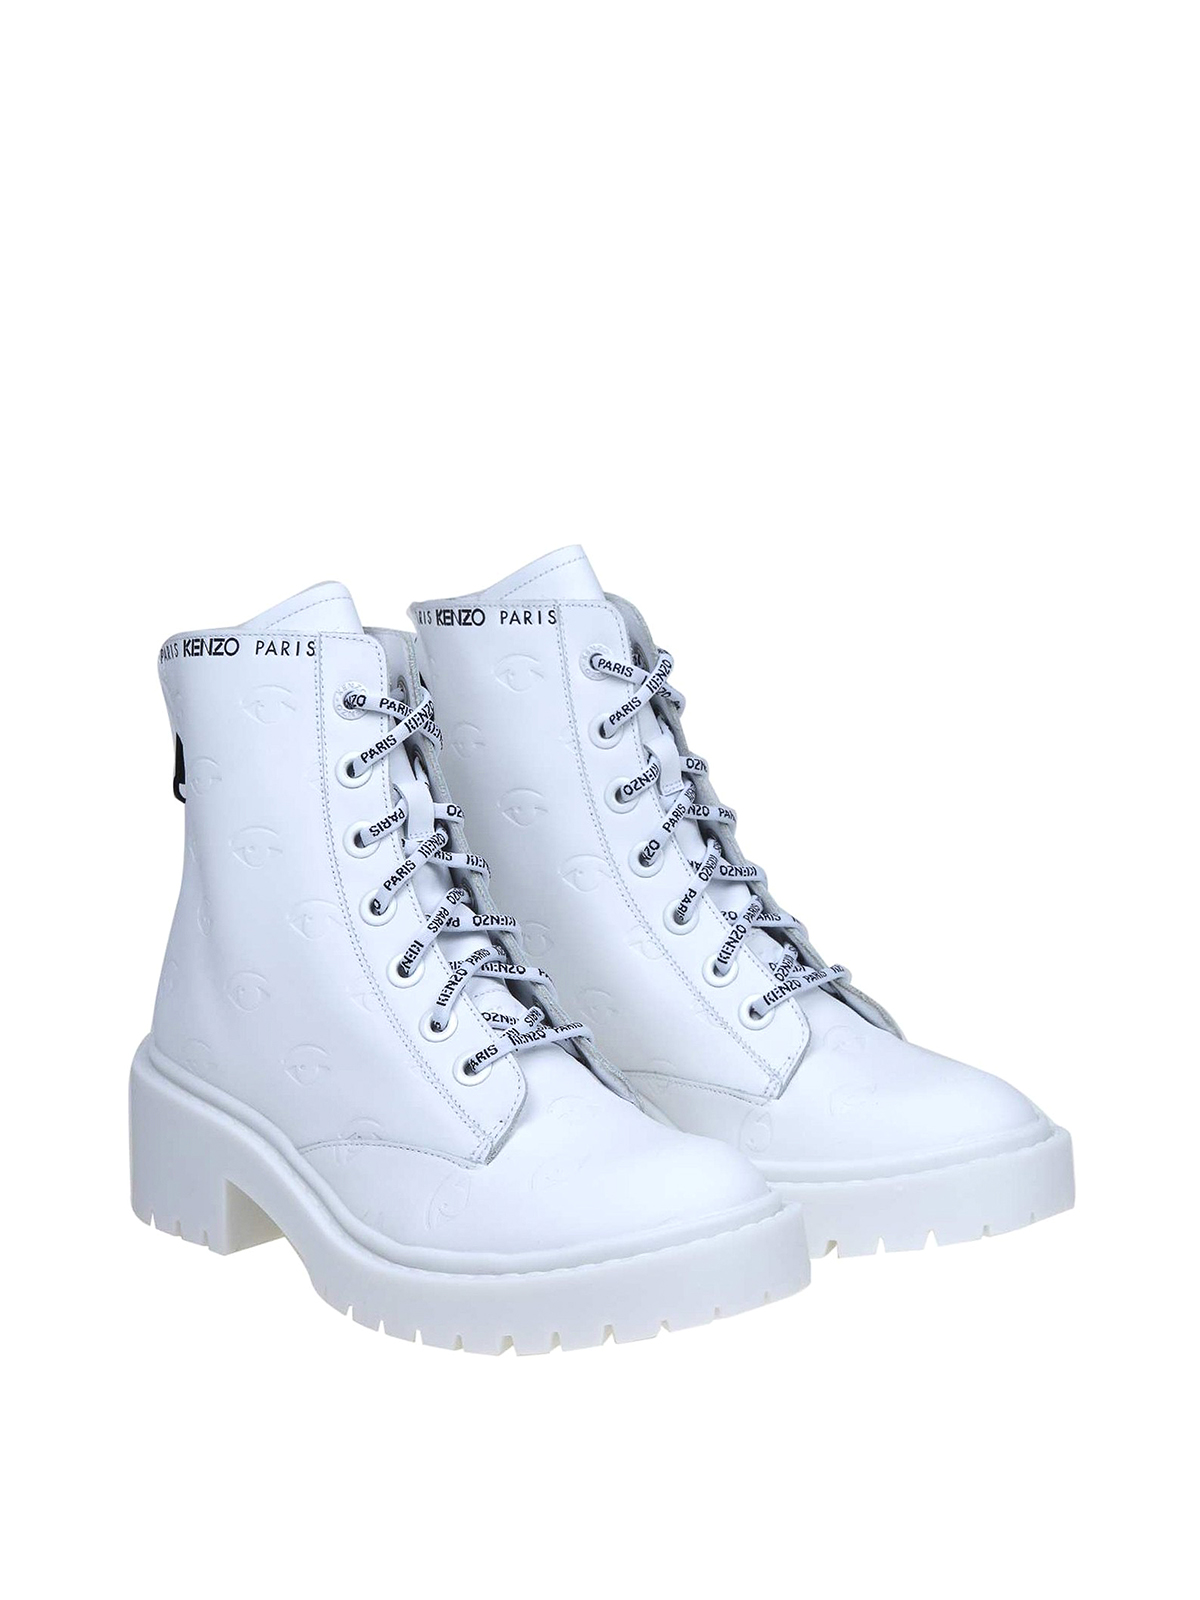 white boots online